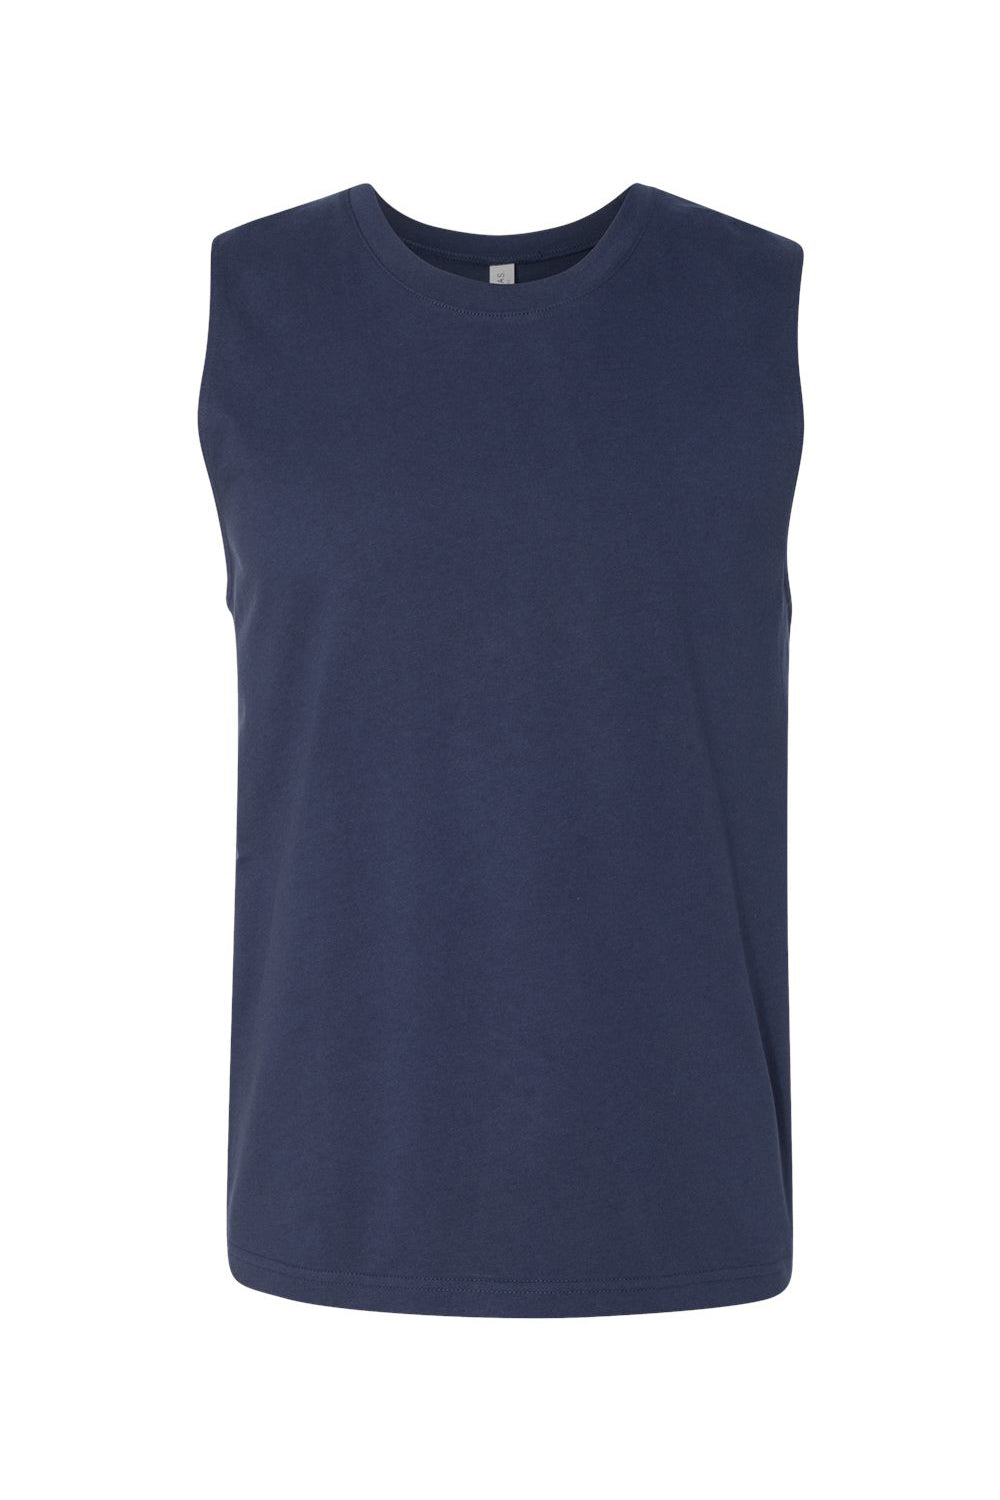 Bella + Canvas 3483 Mens Jersey Muscle Tank Top Navy Blue Flat Front